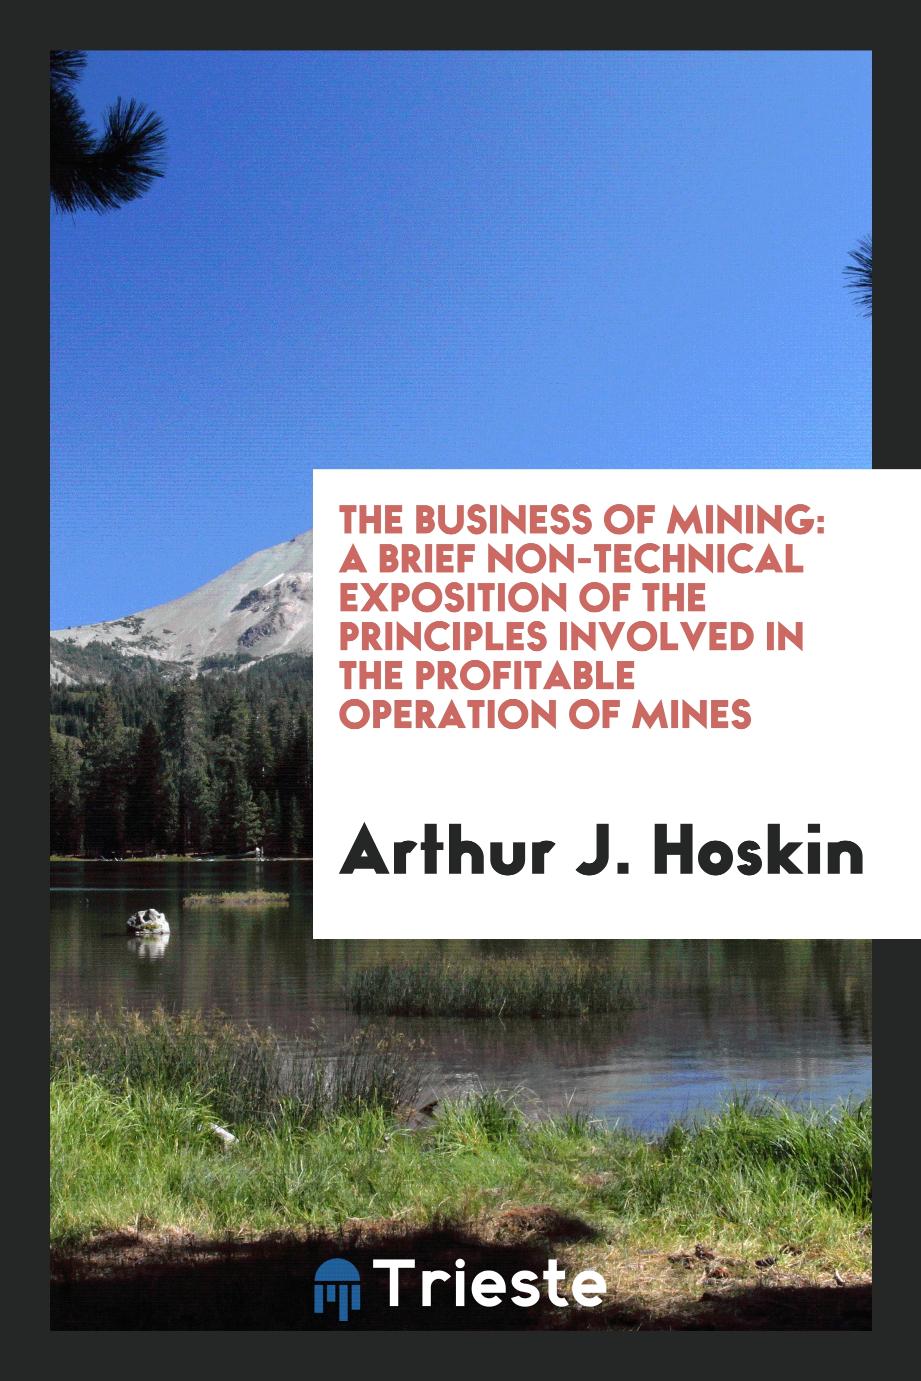 The Business of Mining: A Brief Non-Technical Exposition of the Principles Involved in the Profitable Operation of Mines